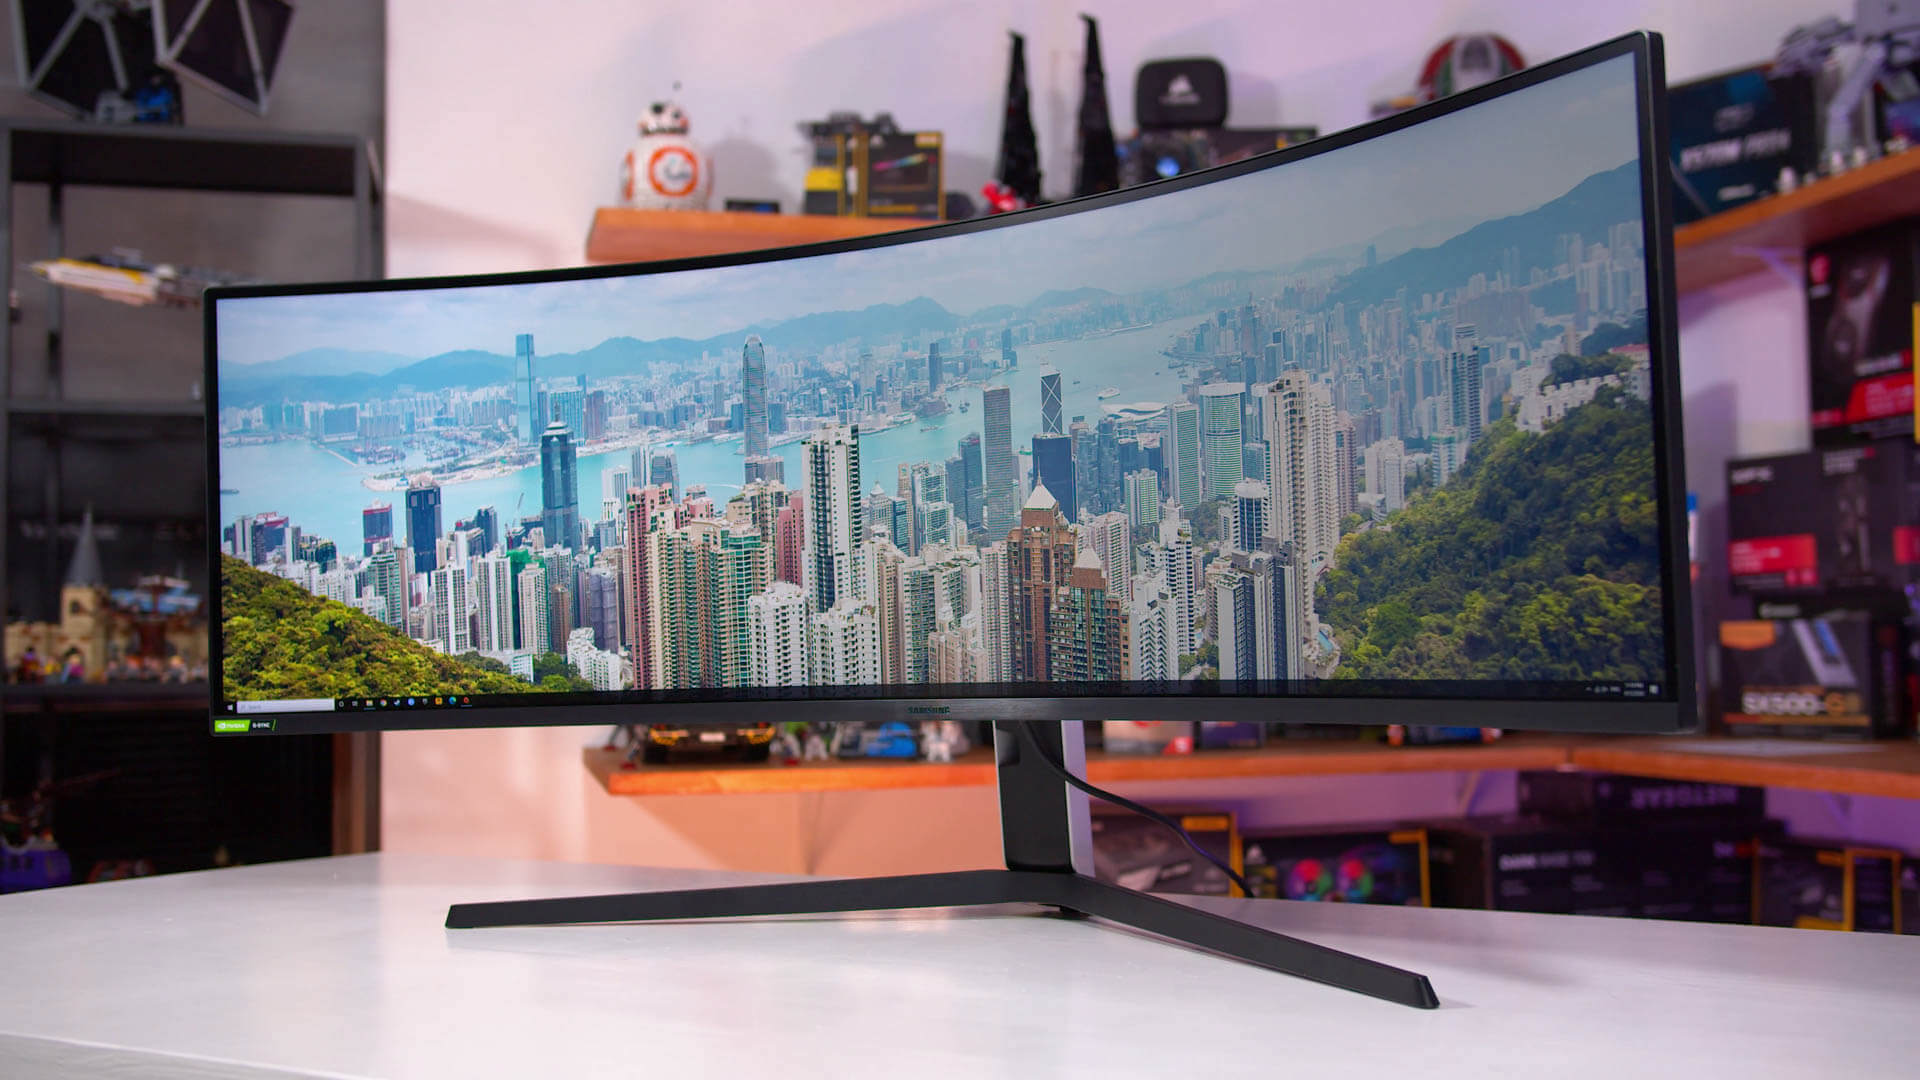 Samsung's next Odyssey G9 monitor listed with 2,000 nits brightness, Mini LED tech